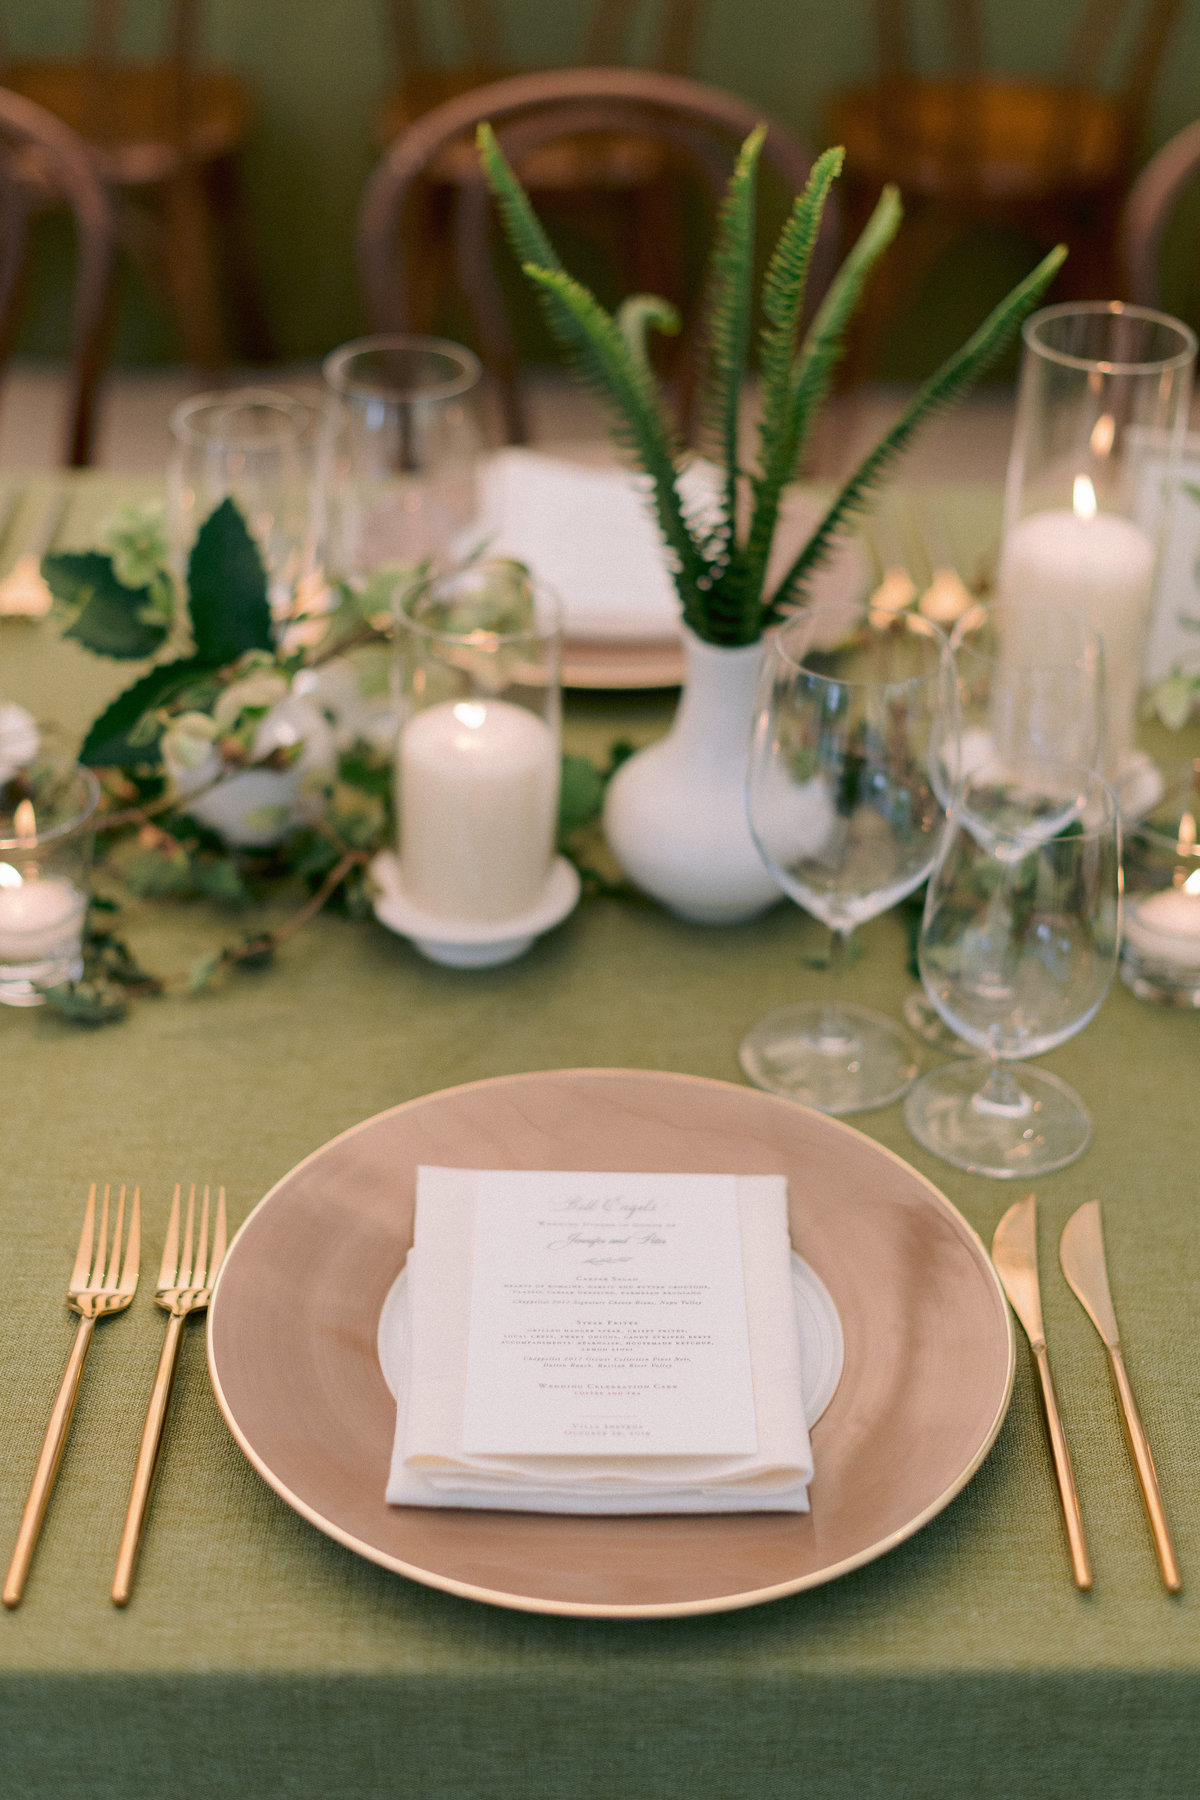 Napa Valley Wedding at Private Residence in Napa Valley by Jenny Schneider Events. Photo by  Melanie Duerkopp.